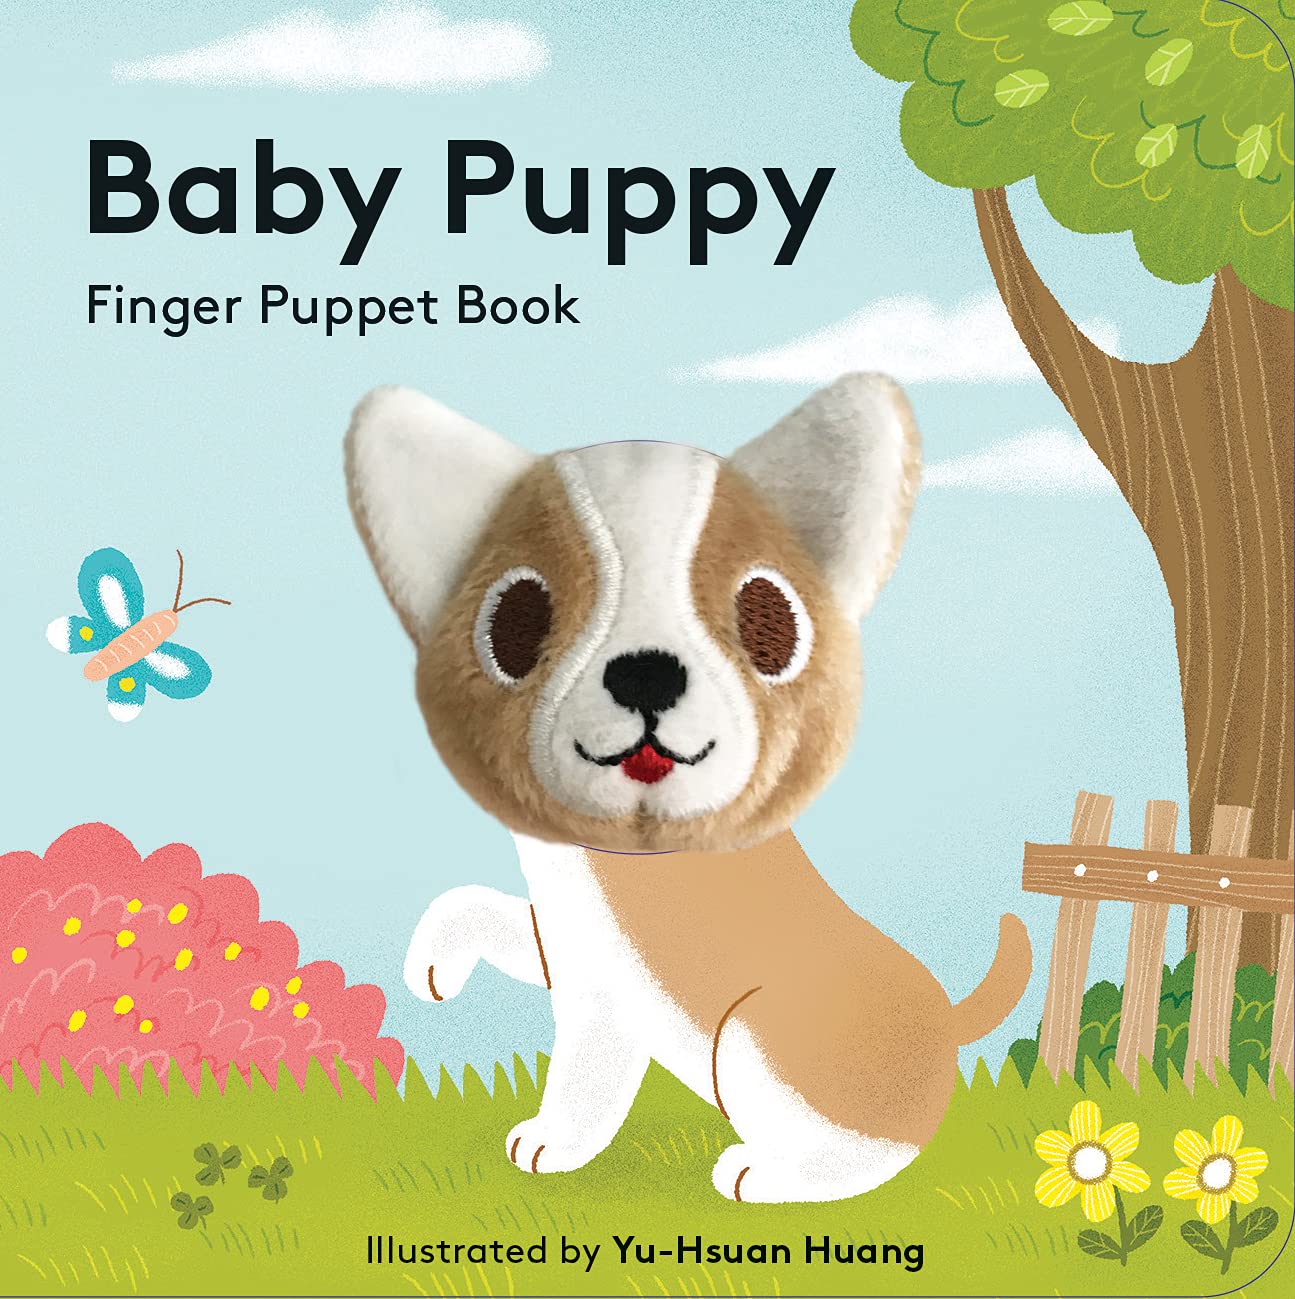 Finger Puppet Books 191 GIFT BABY Chronicle Books Puppy 